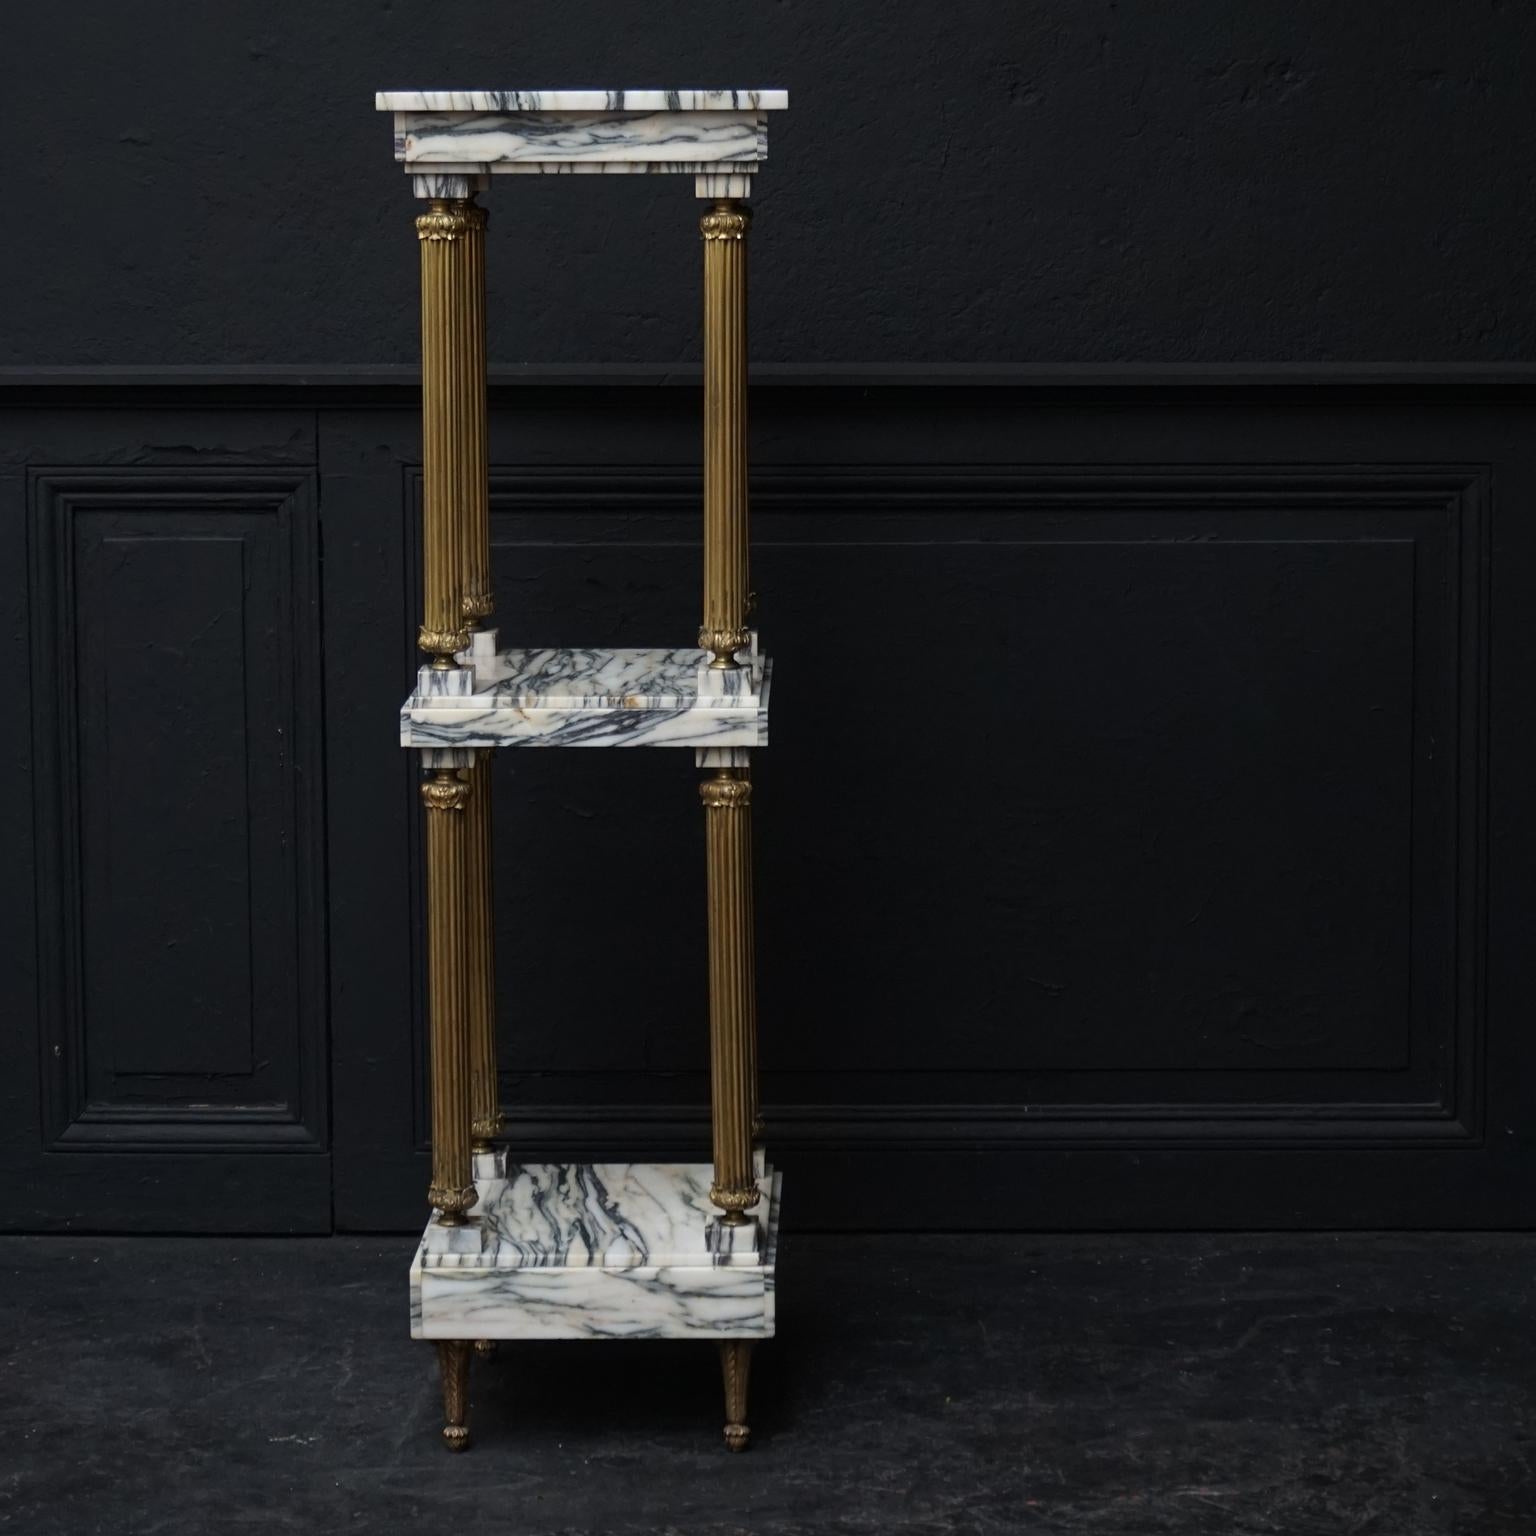 marble & brass 3-tiered stand